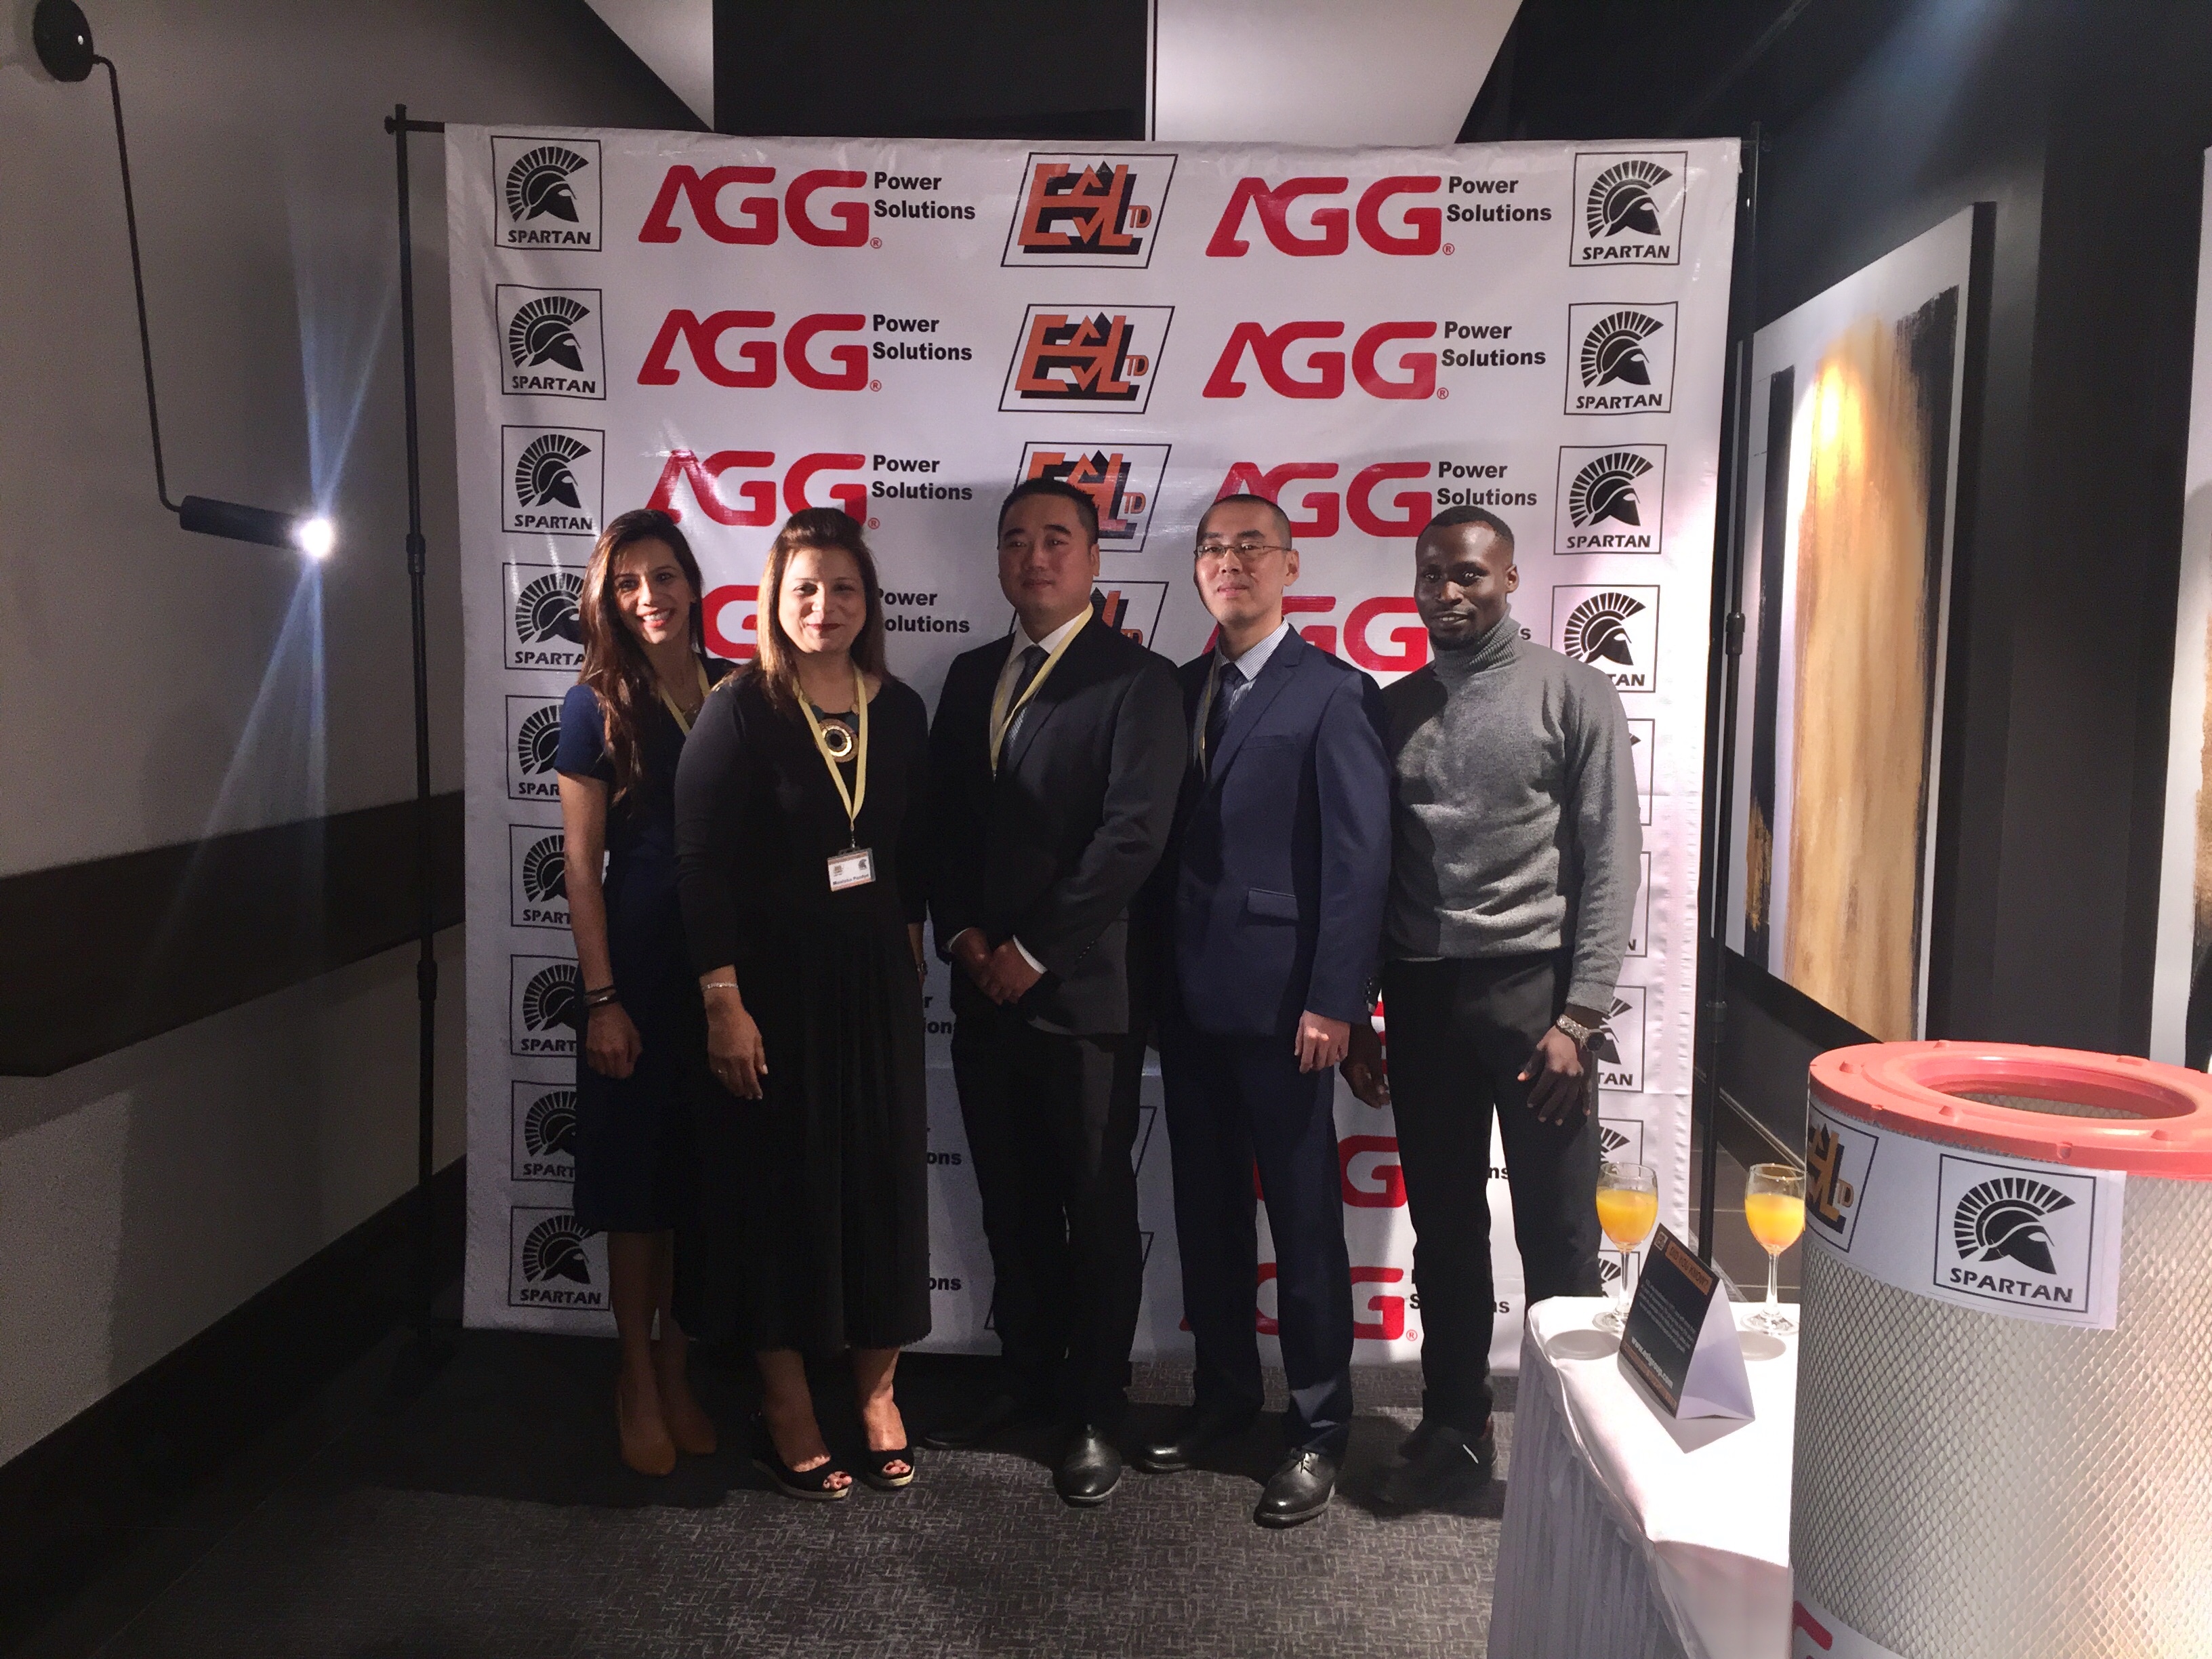 Engineering Supplies launches AGG generators